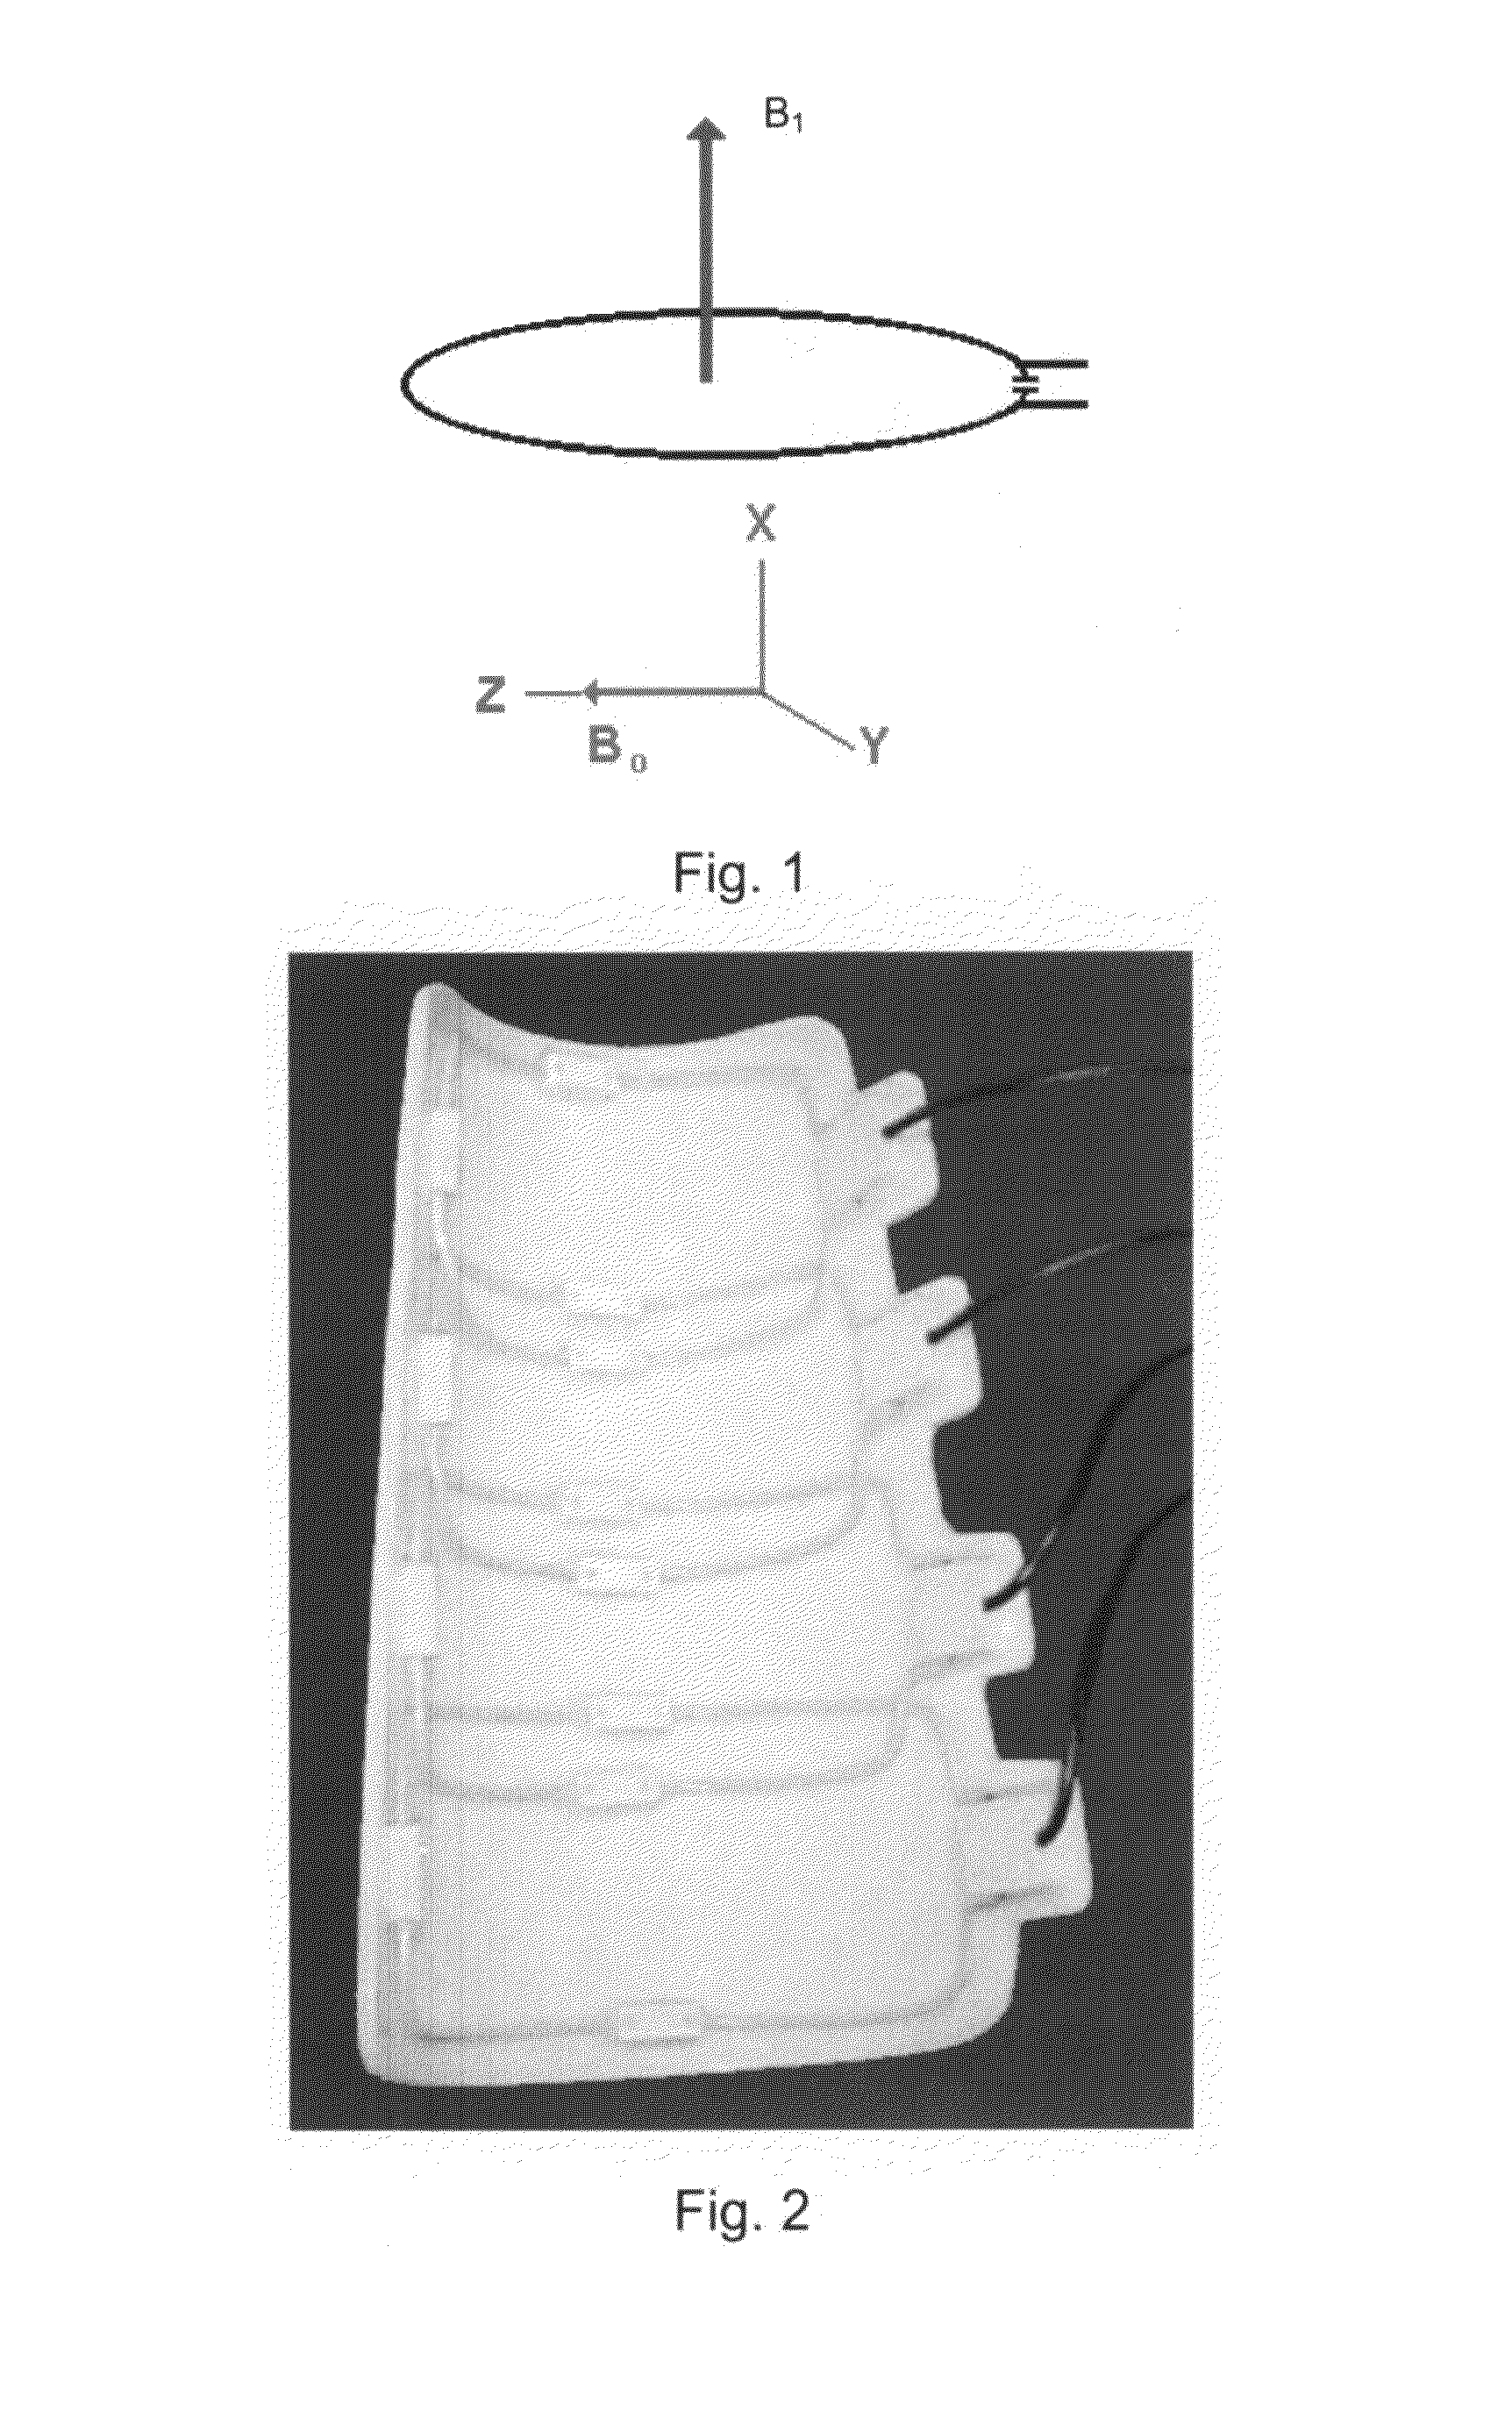 Radiofrequency magnetic field resonator and a method of designing the same